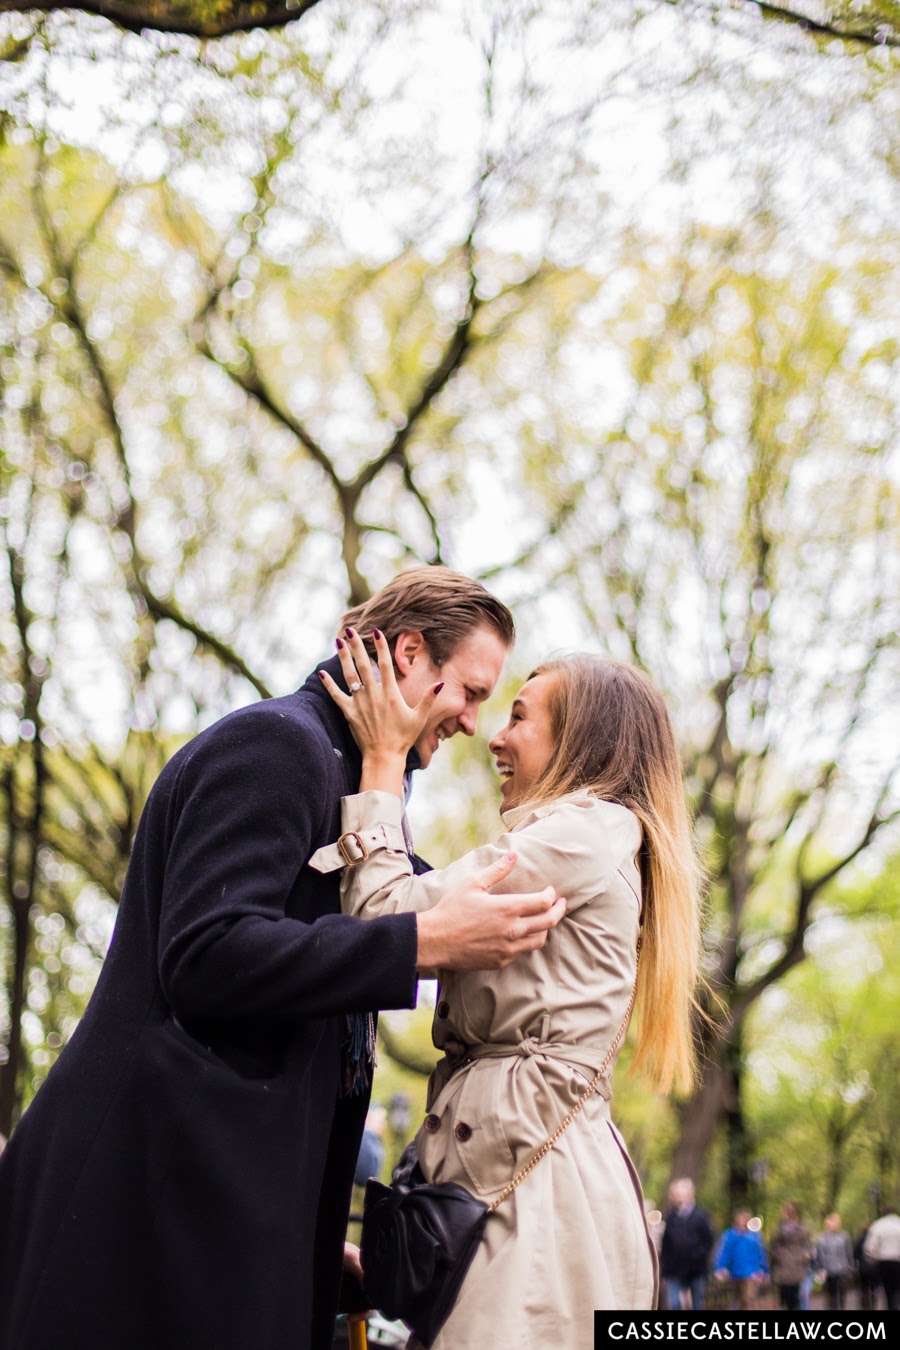 Newly Engaged, romantic destination proposal in Central Park under American Elm trees of The Mall - www.cassiecastellaw.com